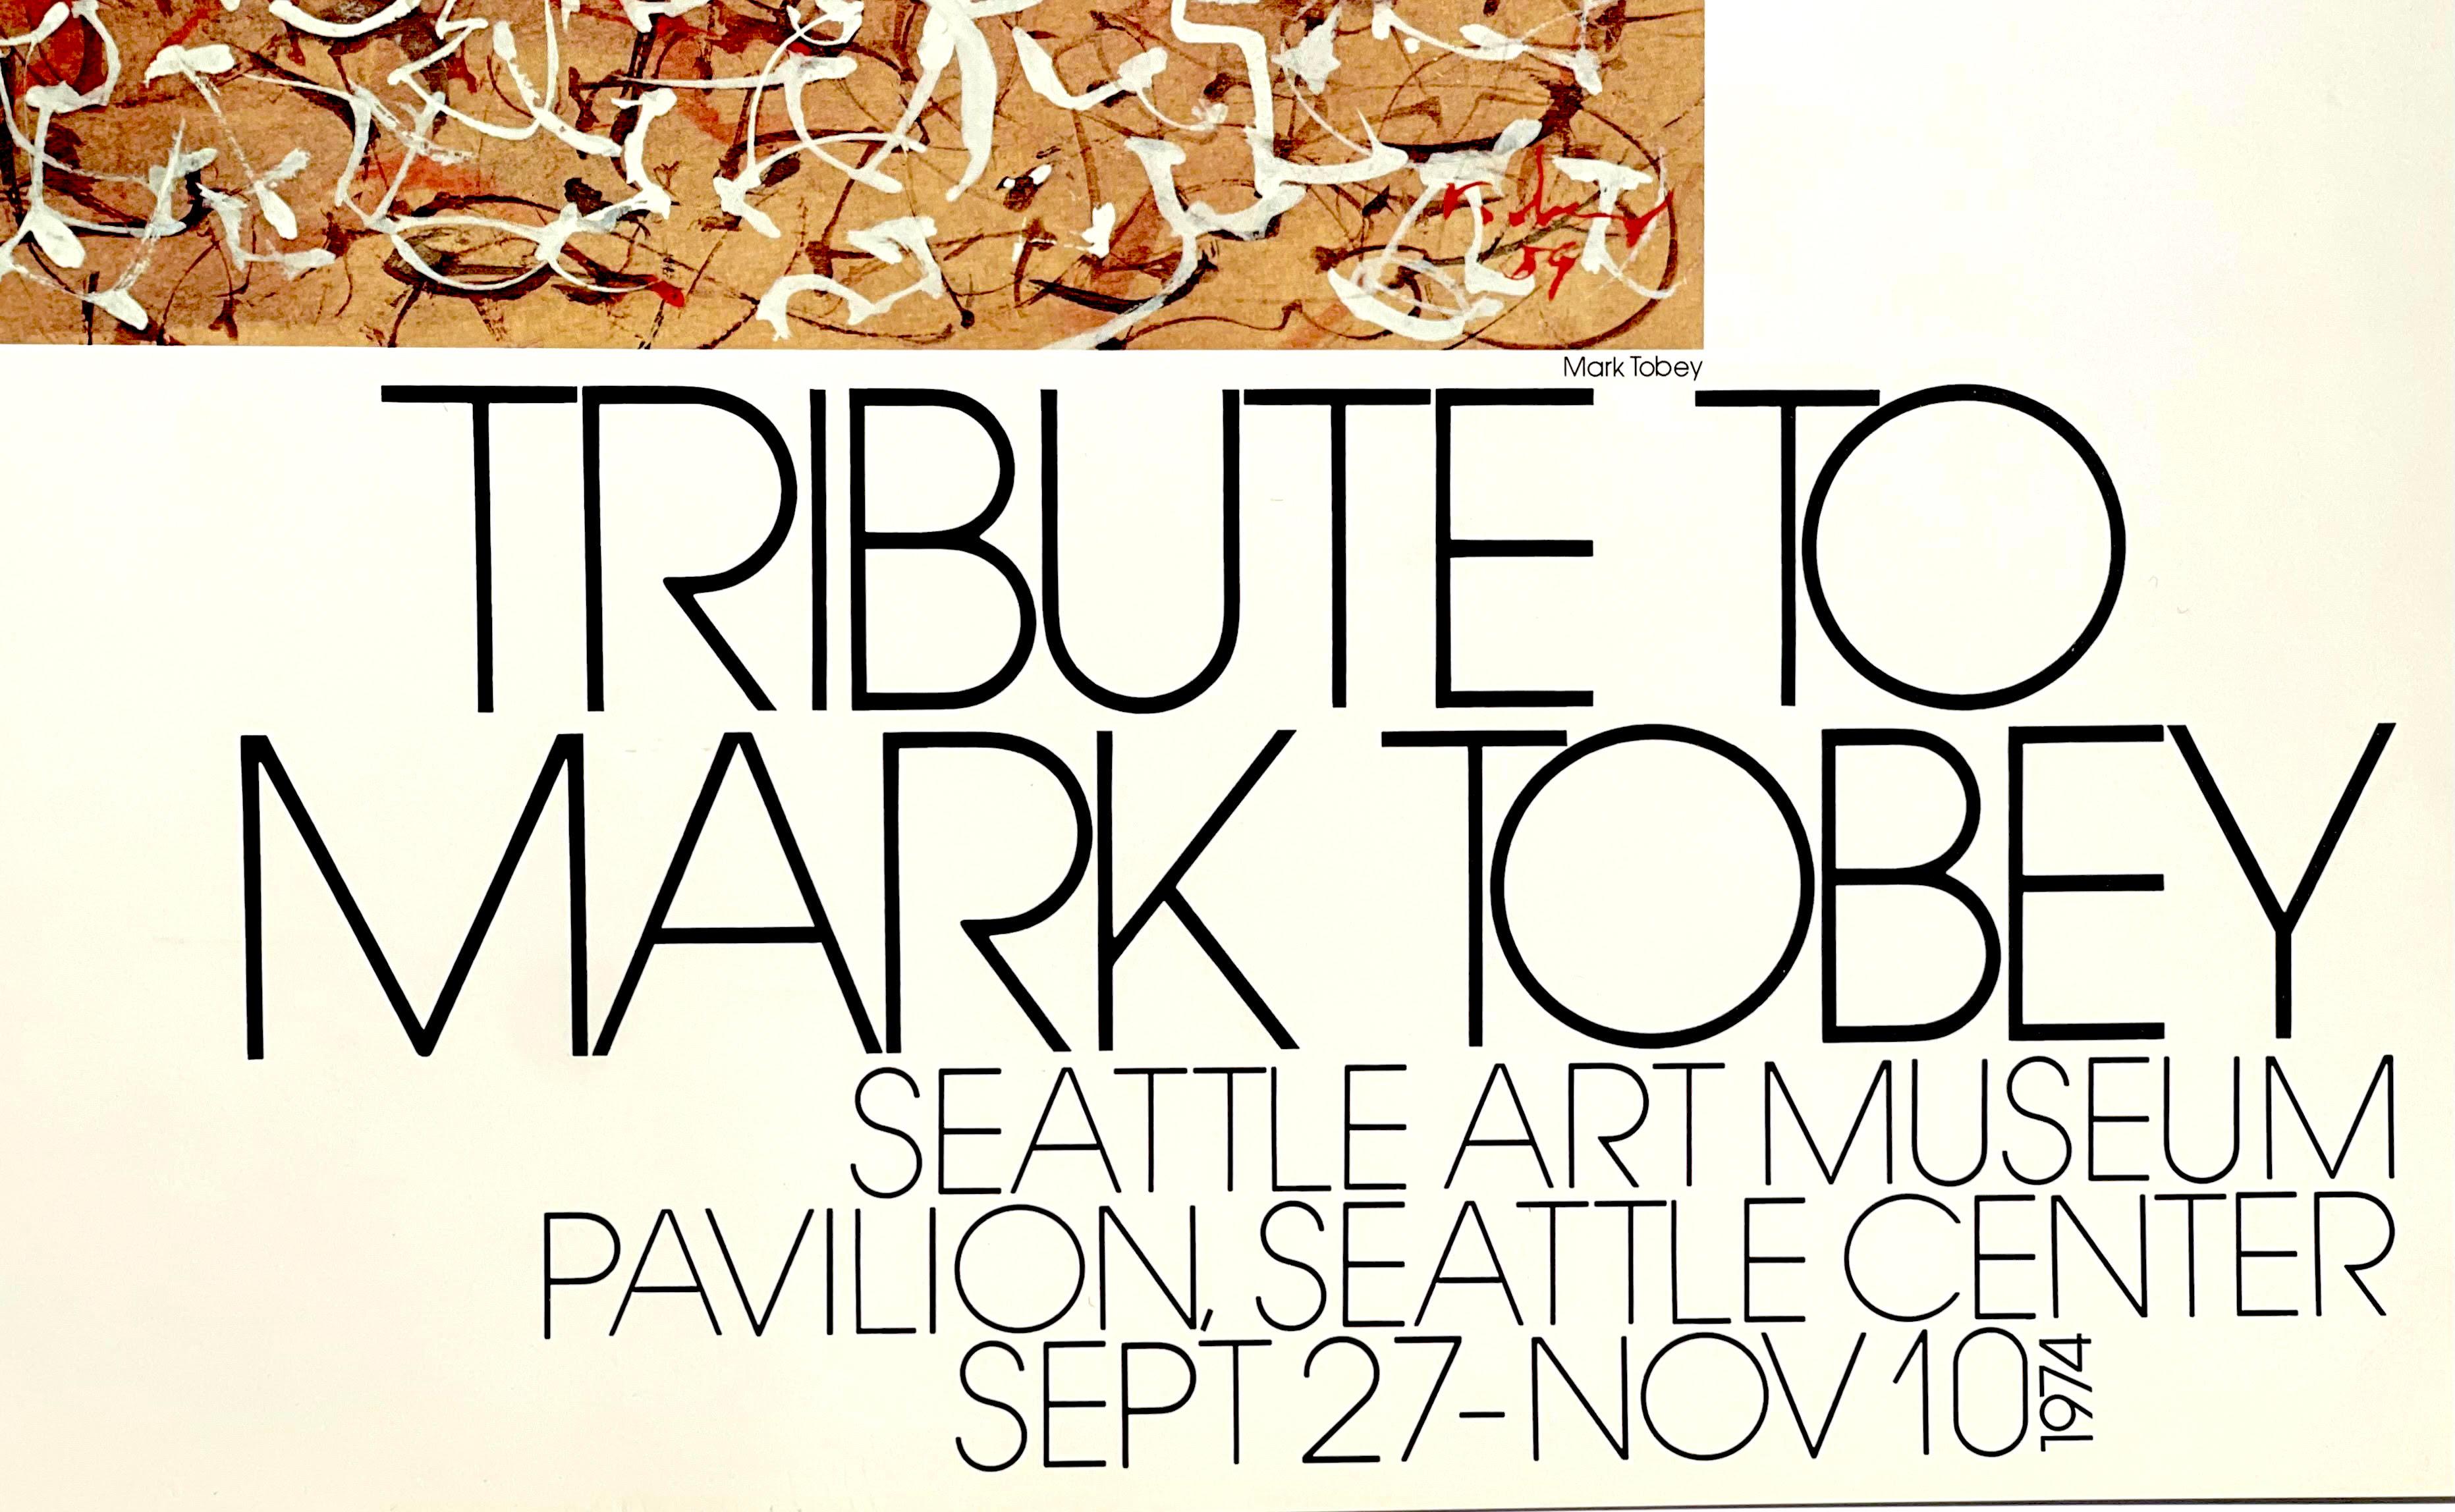 Mark Tobey
Tribute to Mark Tobey Poster, 1974
Offset lithograph poster
21 1/2 × 17 1/2 inches
Unframed
This was published on the occasion of the exhibition 